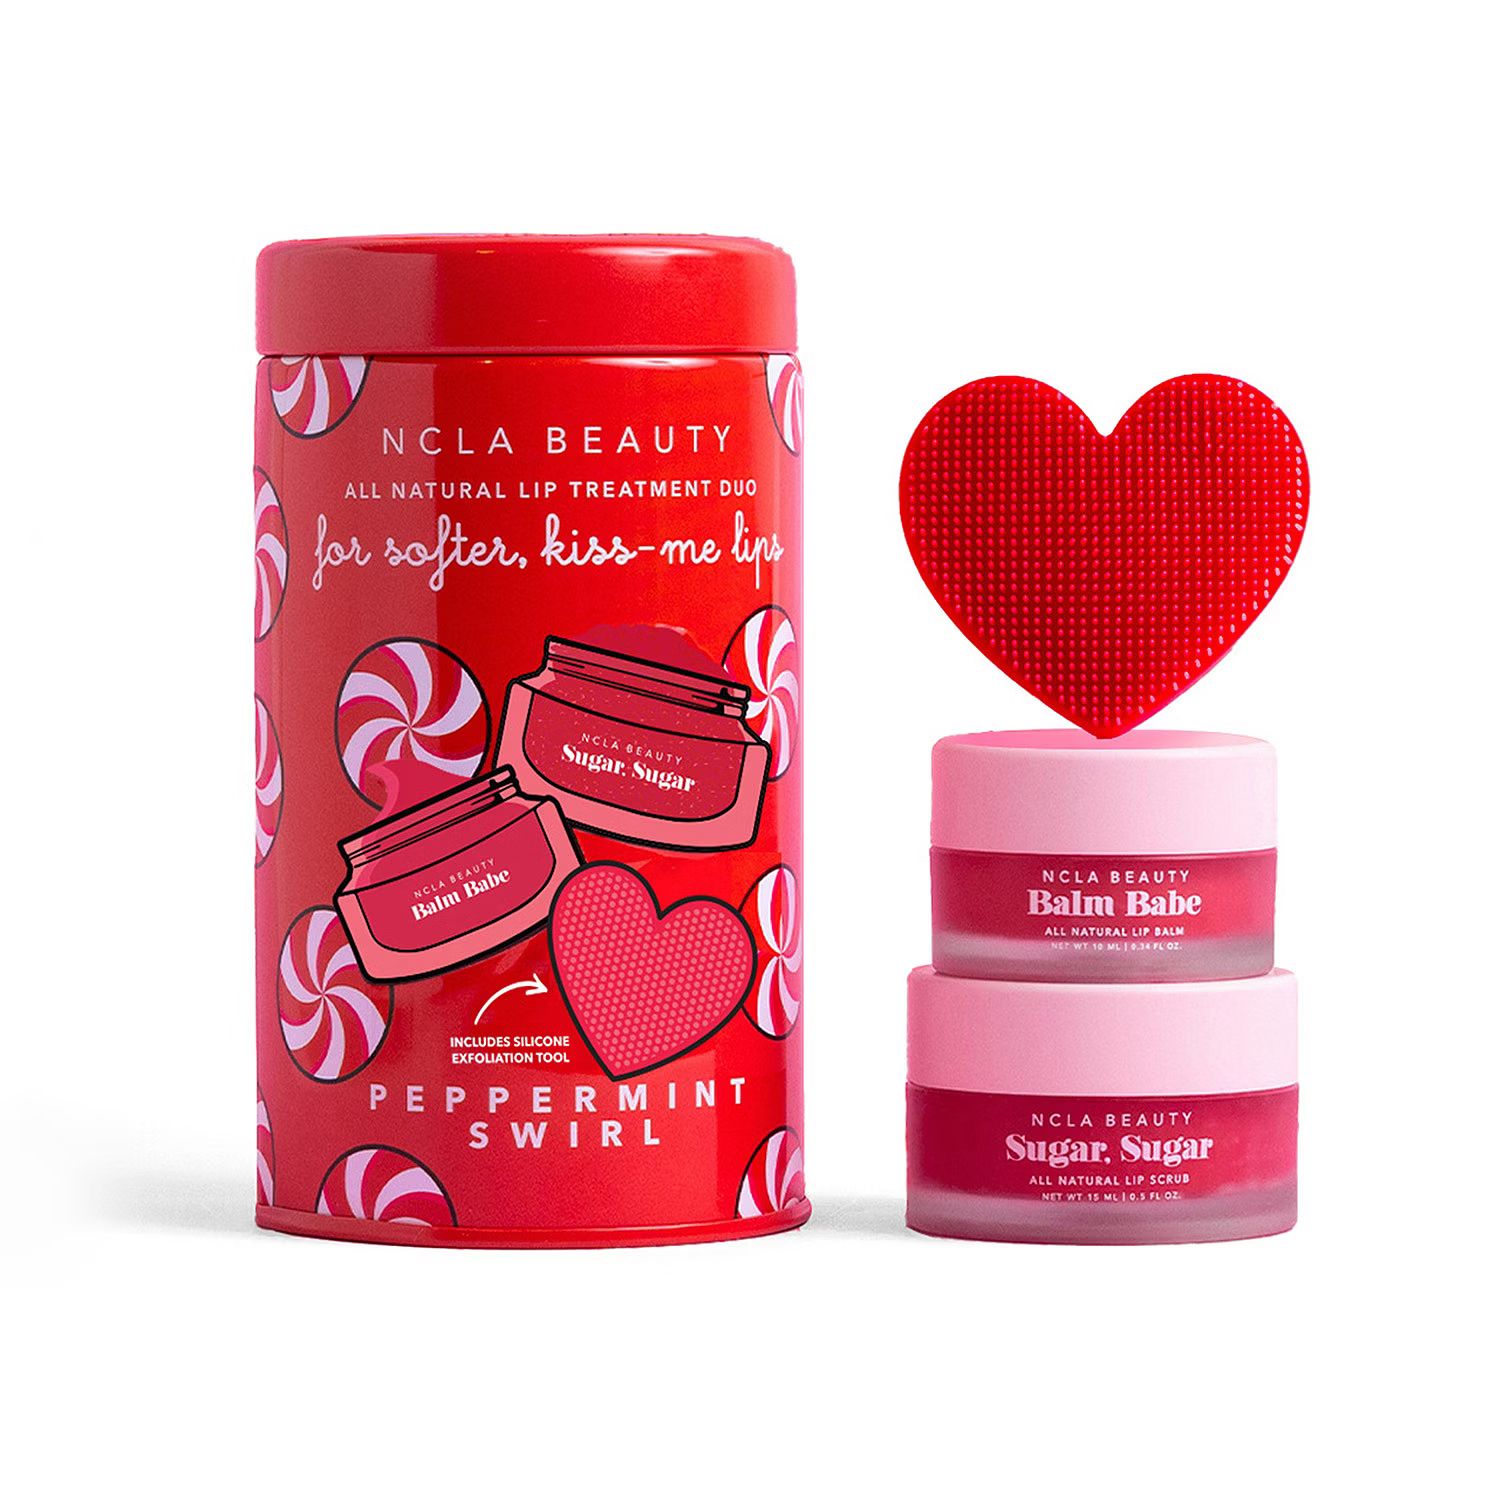 NCLA Beauty All Natural Lip Treatment Gift Set- Peppermint Swirl | JCPenney